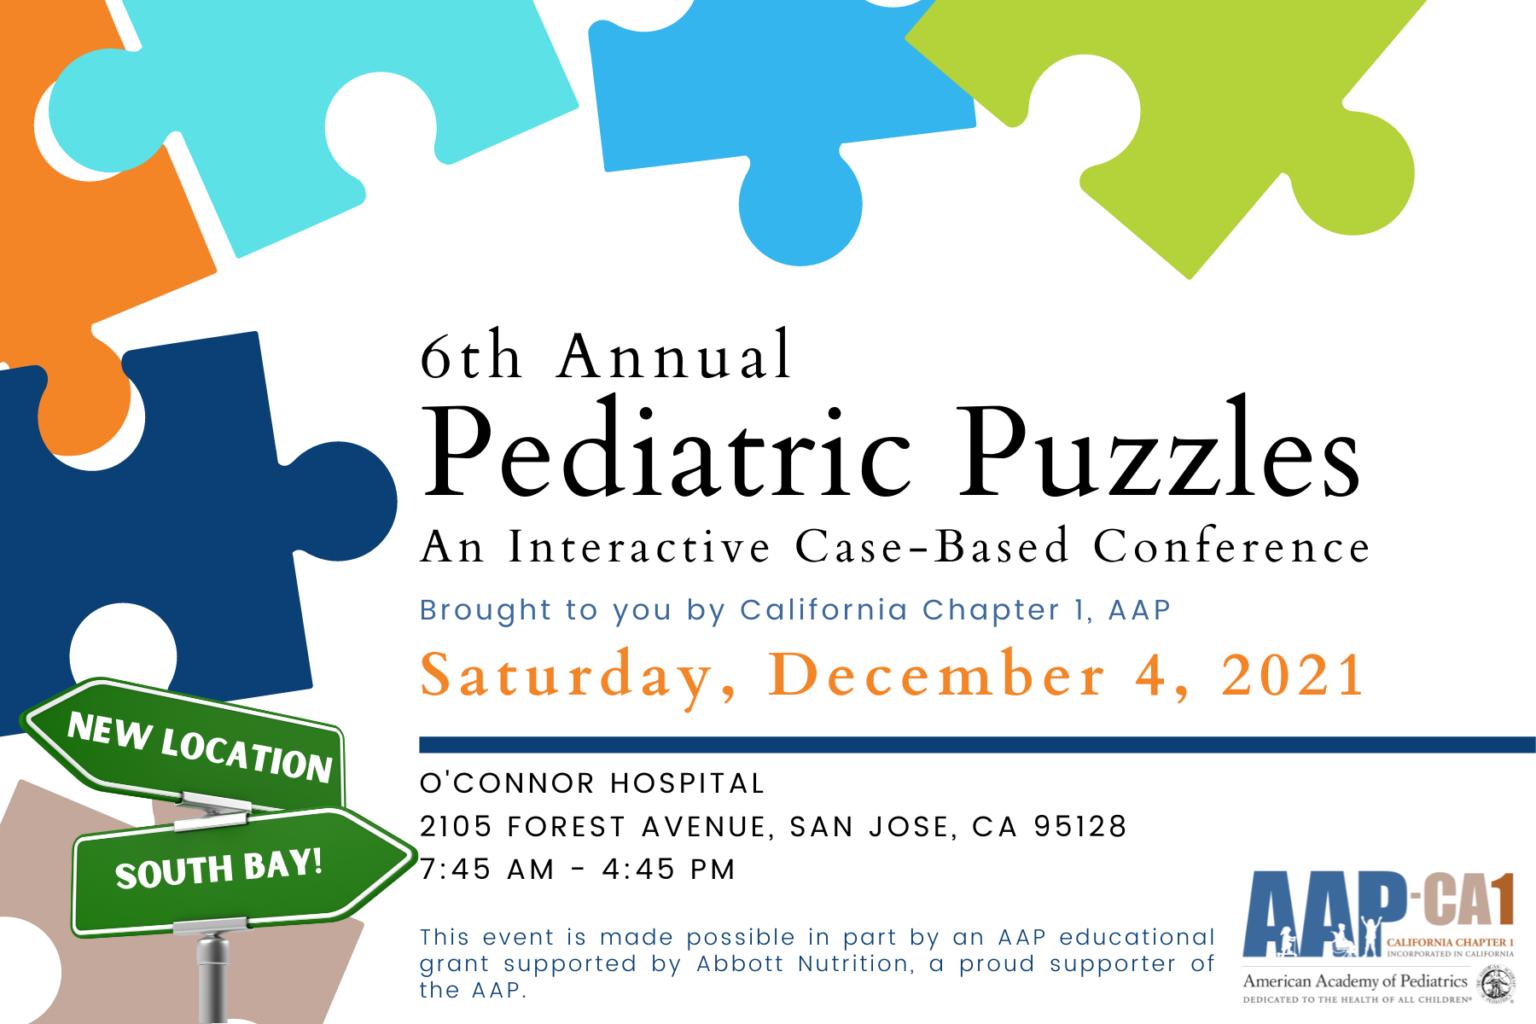 6th Annual Pediatric Puzzles CME Conference American Academy of